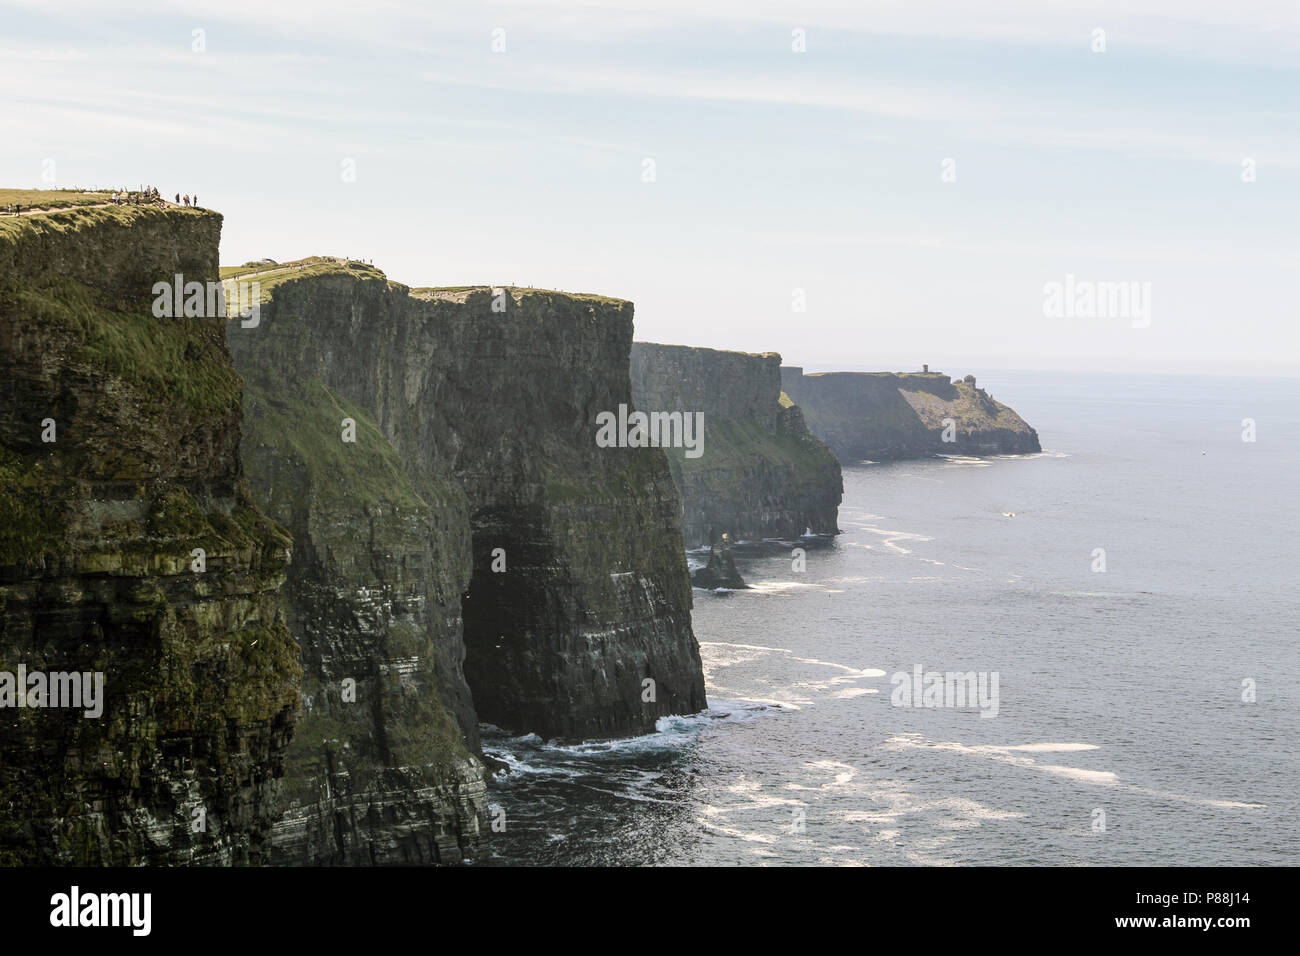 The Cliffs of Moher are soaring sea cliffs located at the southwestern edge of the Burren region in County Clare, Ireland. Stock Photo